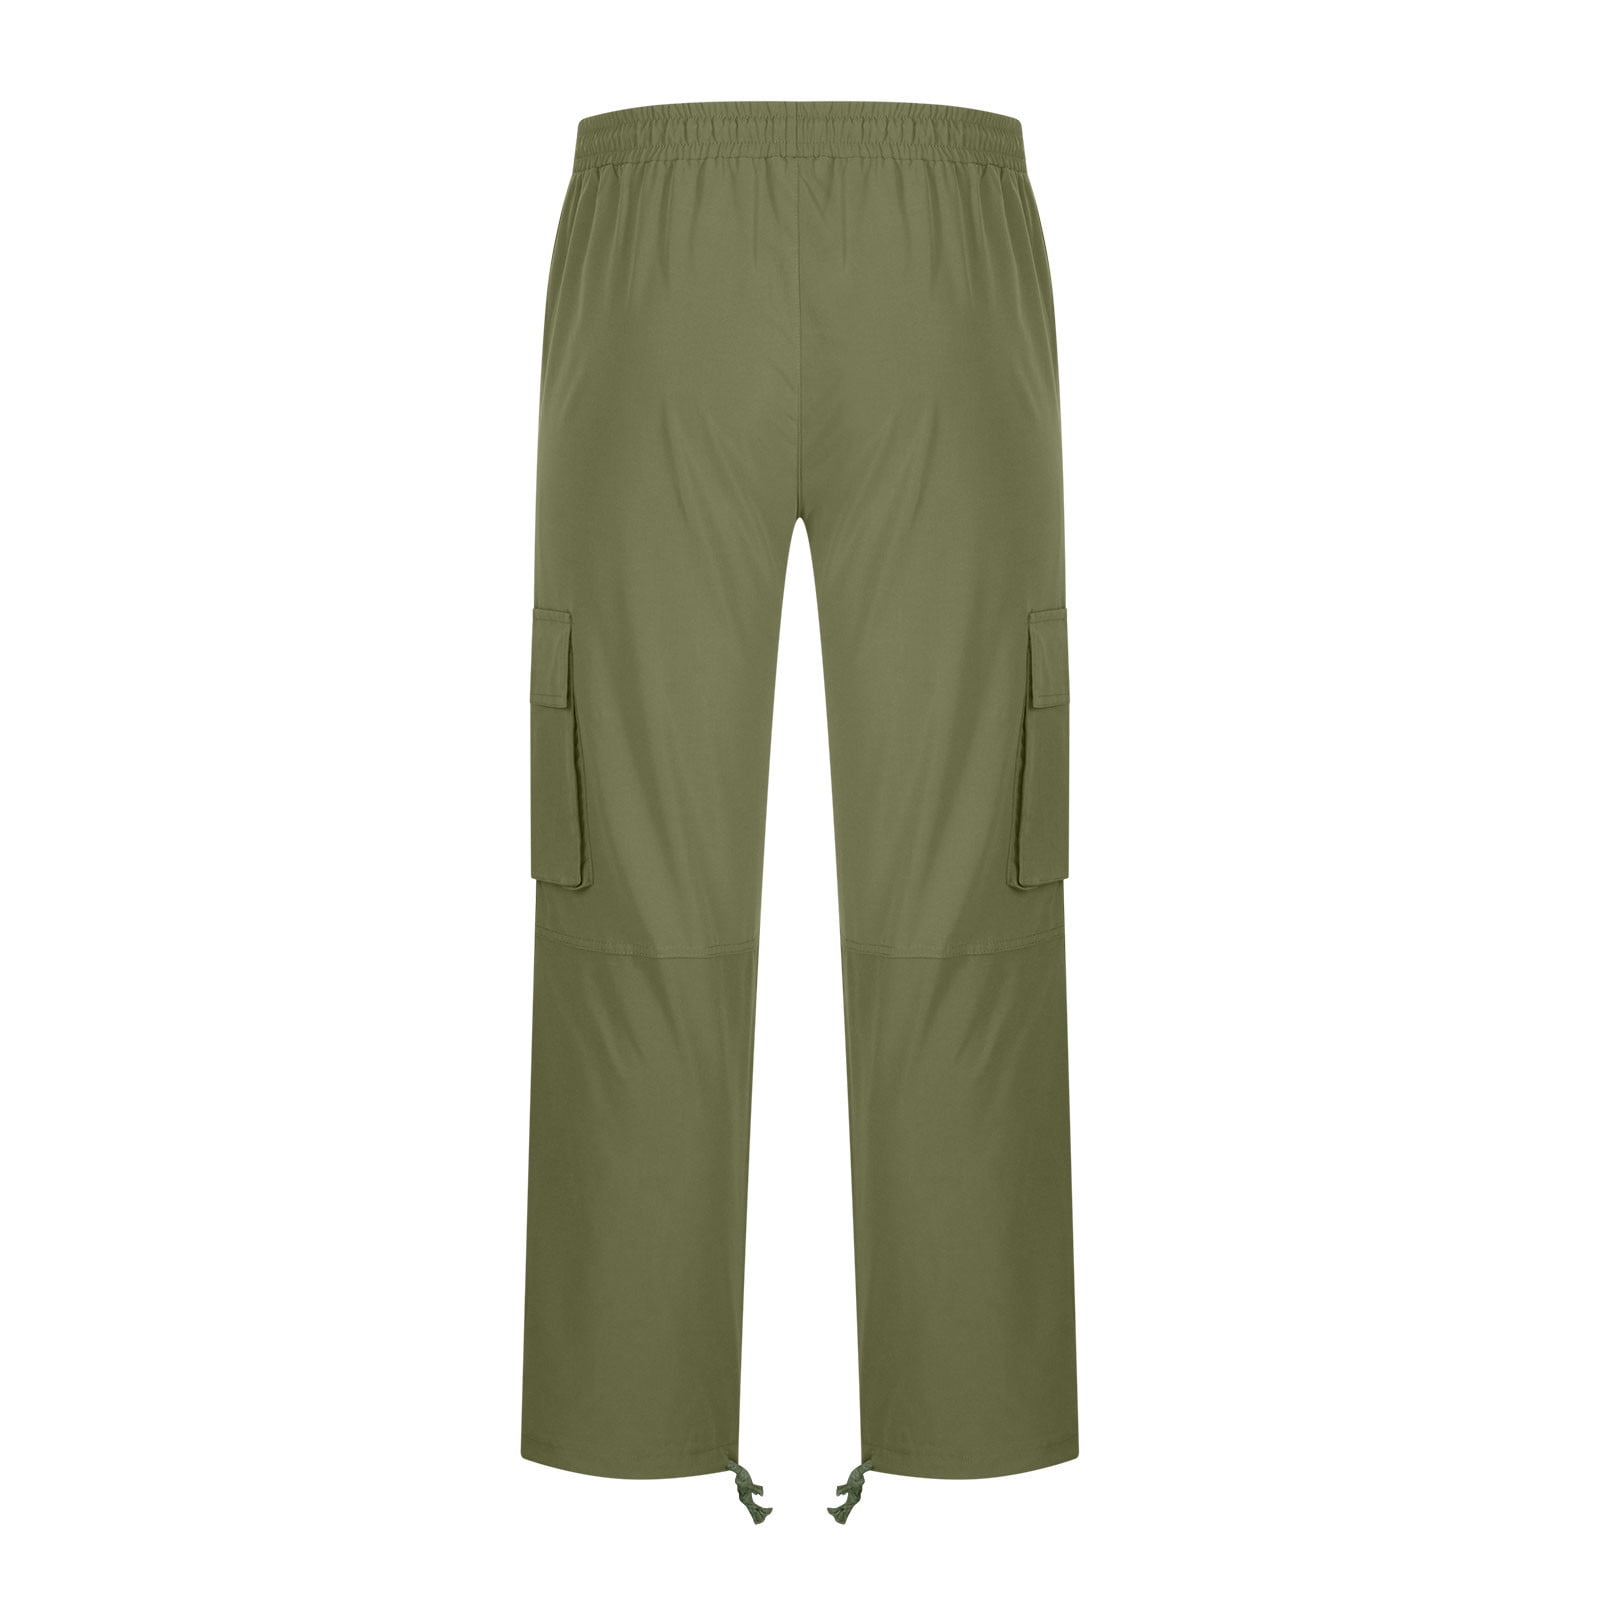 XFLWAM Men's Cargo Cargo Lightweight Work Pants Hiking Ripstop Cargo Pants  Relaxed Fit Mens Cargo Pant-Reg and Big and Tall Sizes Green XXL